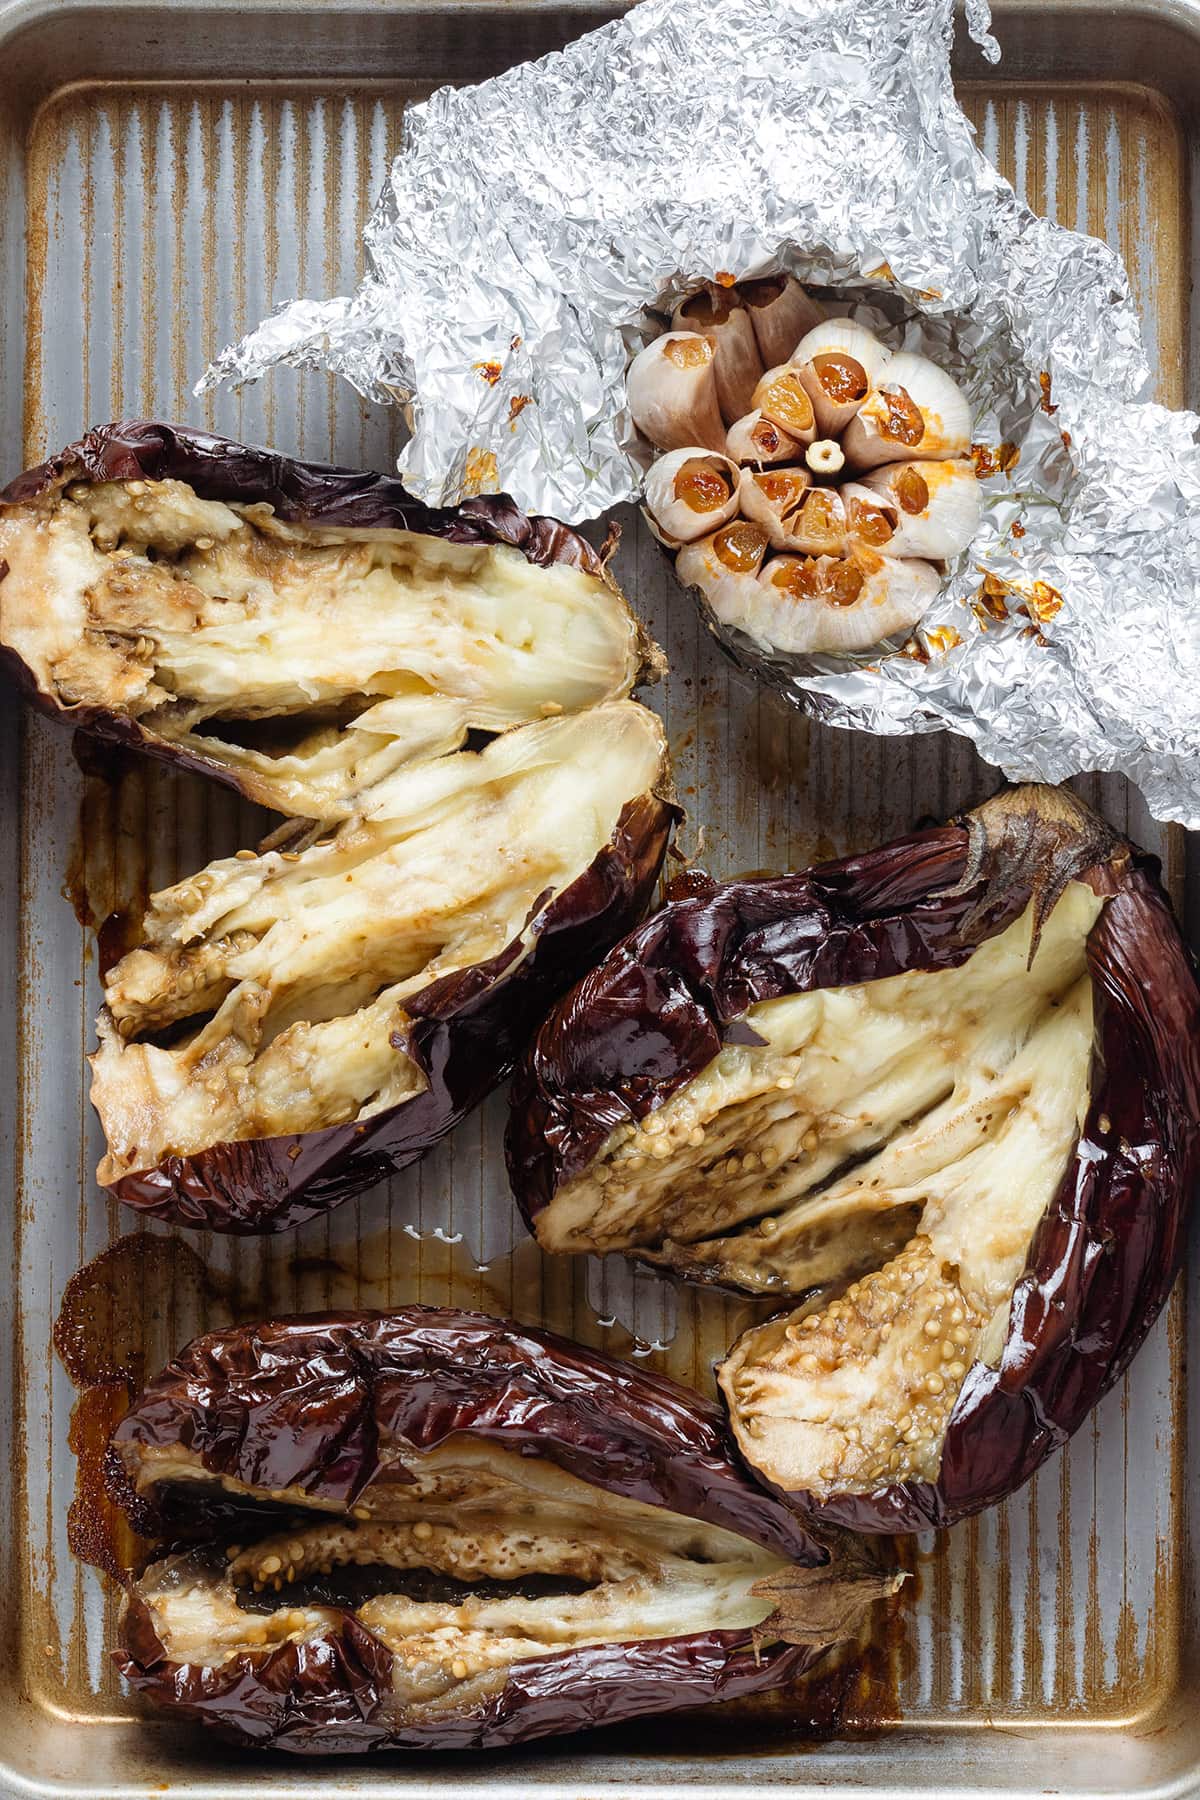 Roasted whole eggplants sliced in half on a baking sheet with roasted garlic in foil.